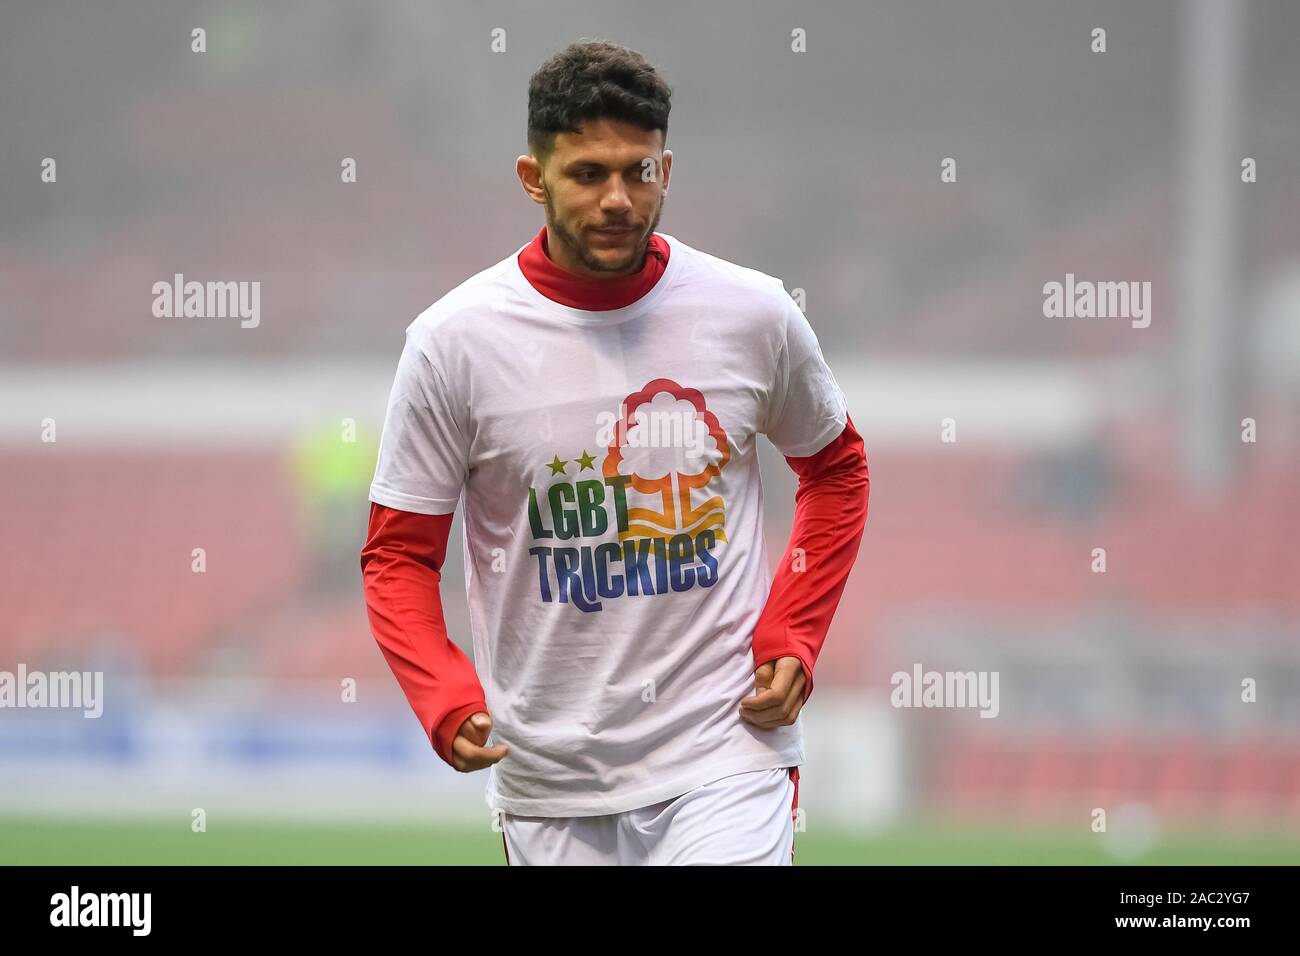 Nottingham, UK. 30th Nov, 2019. Tobias Figueiredo (3) of Nottingham Forest warms up with LBGT Trickies logo, showing support for the LBGT community during the Sky Bet Championship match between Nottingham Forest and Cardiff City at the City Ground, Nottingham on Saturday 30th November 2019. (Credit: Jon Hobley | MI News) Photograph may only be used for newspaper and/or magazine editorial purposes, license required for commercial use Credit: MI News & Sport /Alamy Live News Credit: MI News & Sport /Alamy Live News Credit: MI News & Sport /Alamy Live News Stock Photo